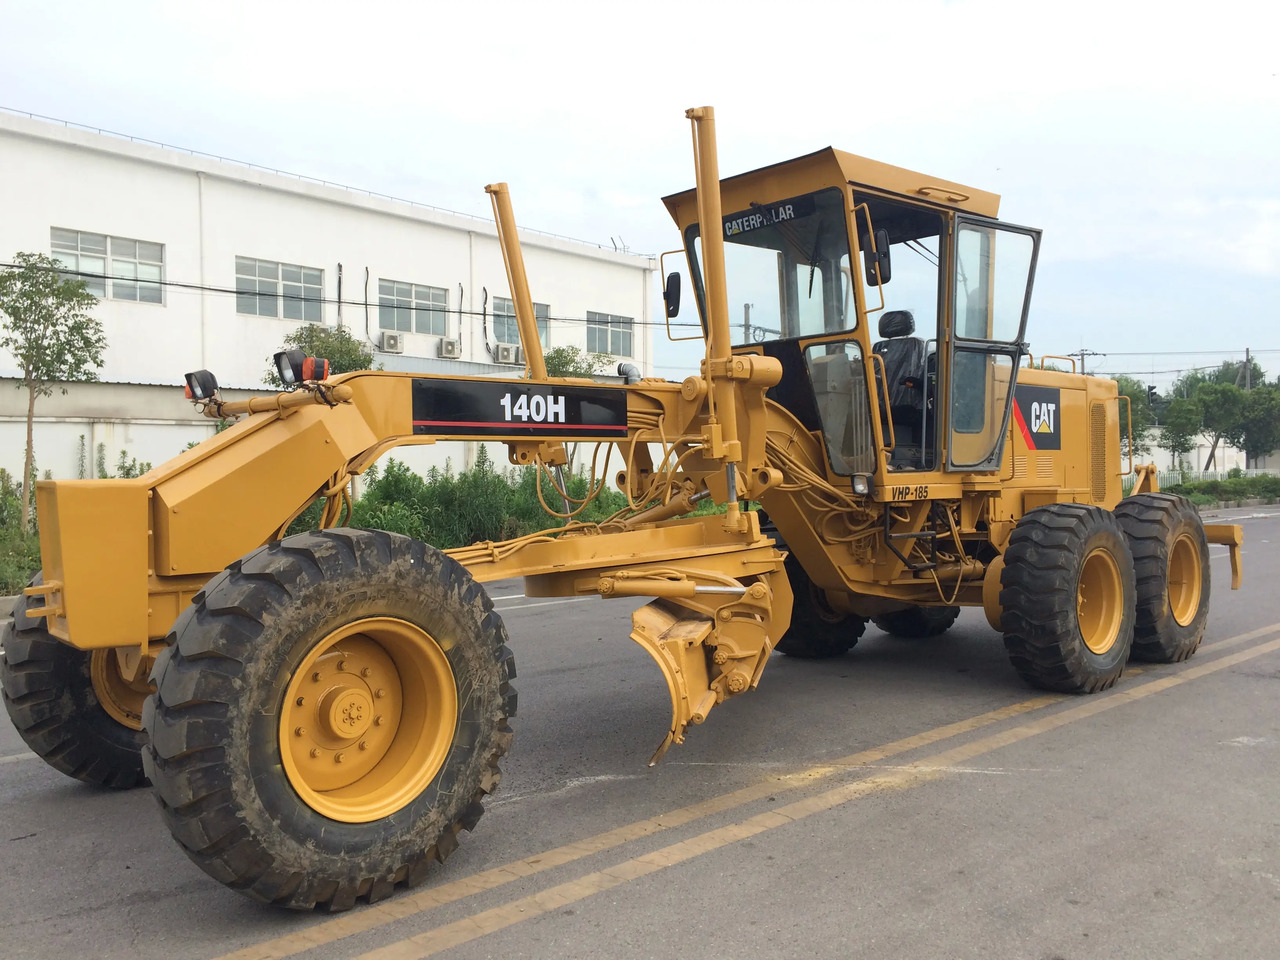 Autogreder Hot sale Used Cat 140H motor grader with good condition,USED heavy equipment used motor grader CAT 140H grader in China: Foto 3